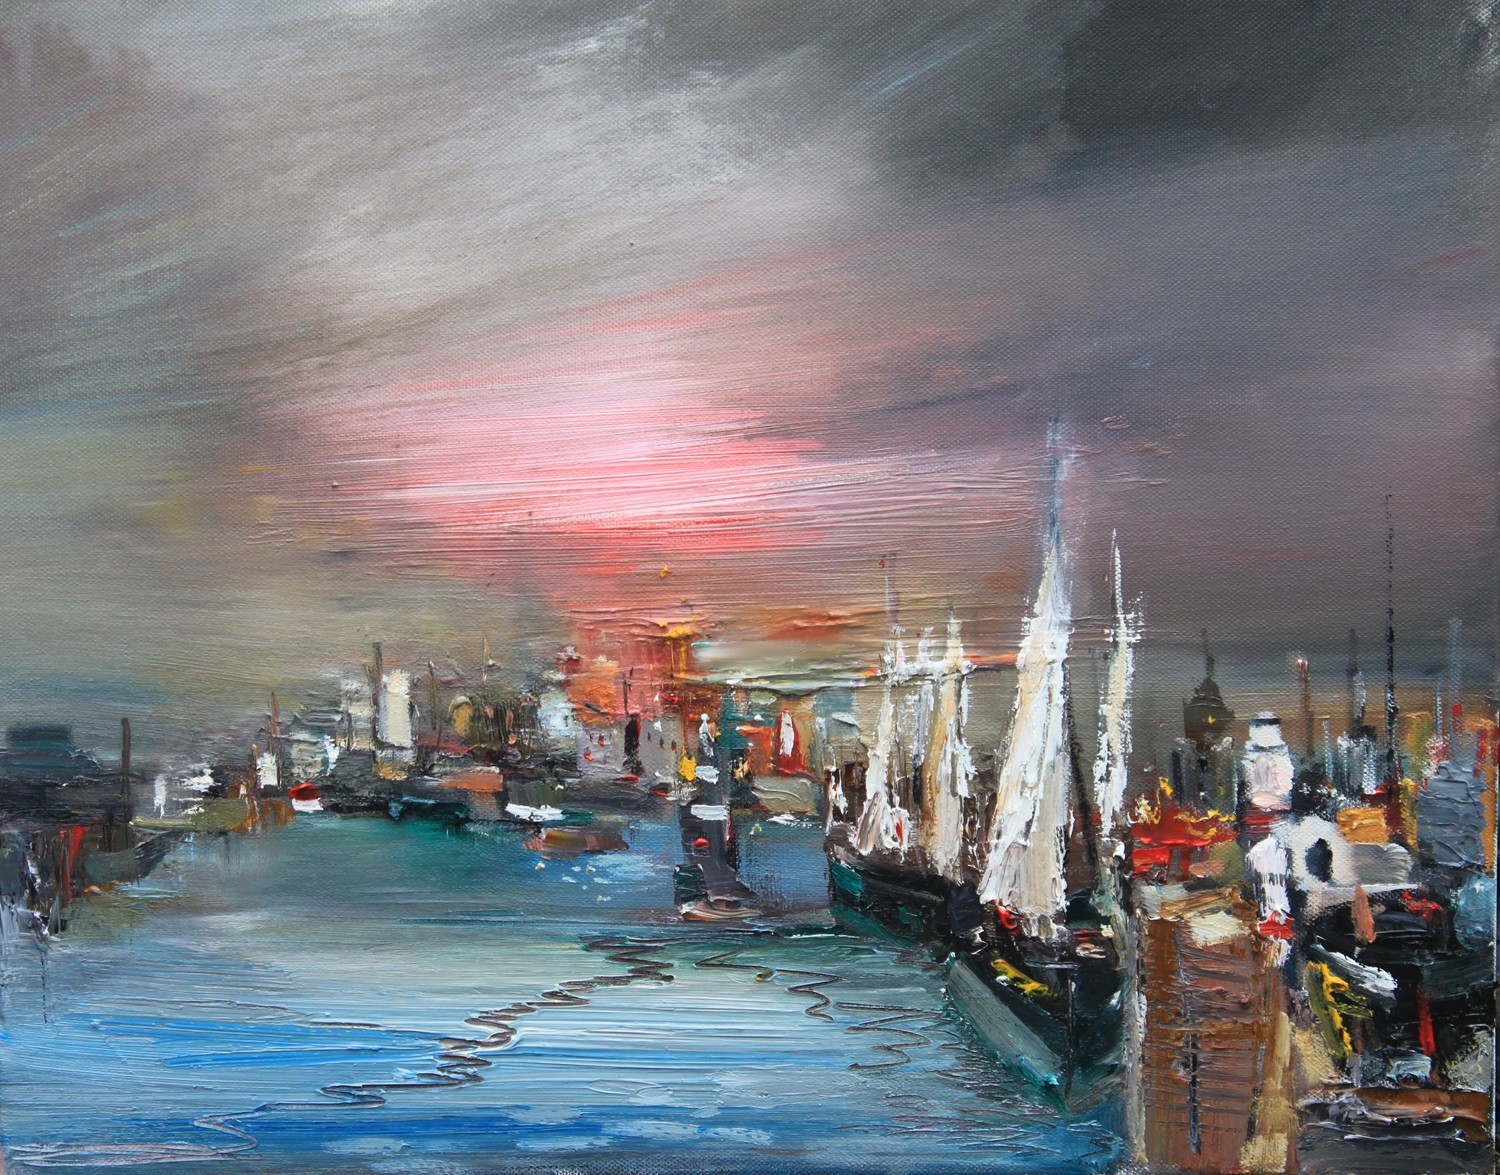 'Night at the Harbour' by artist Rosanne Barr